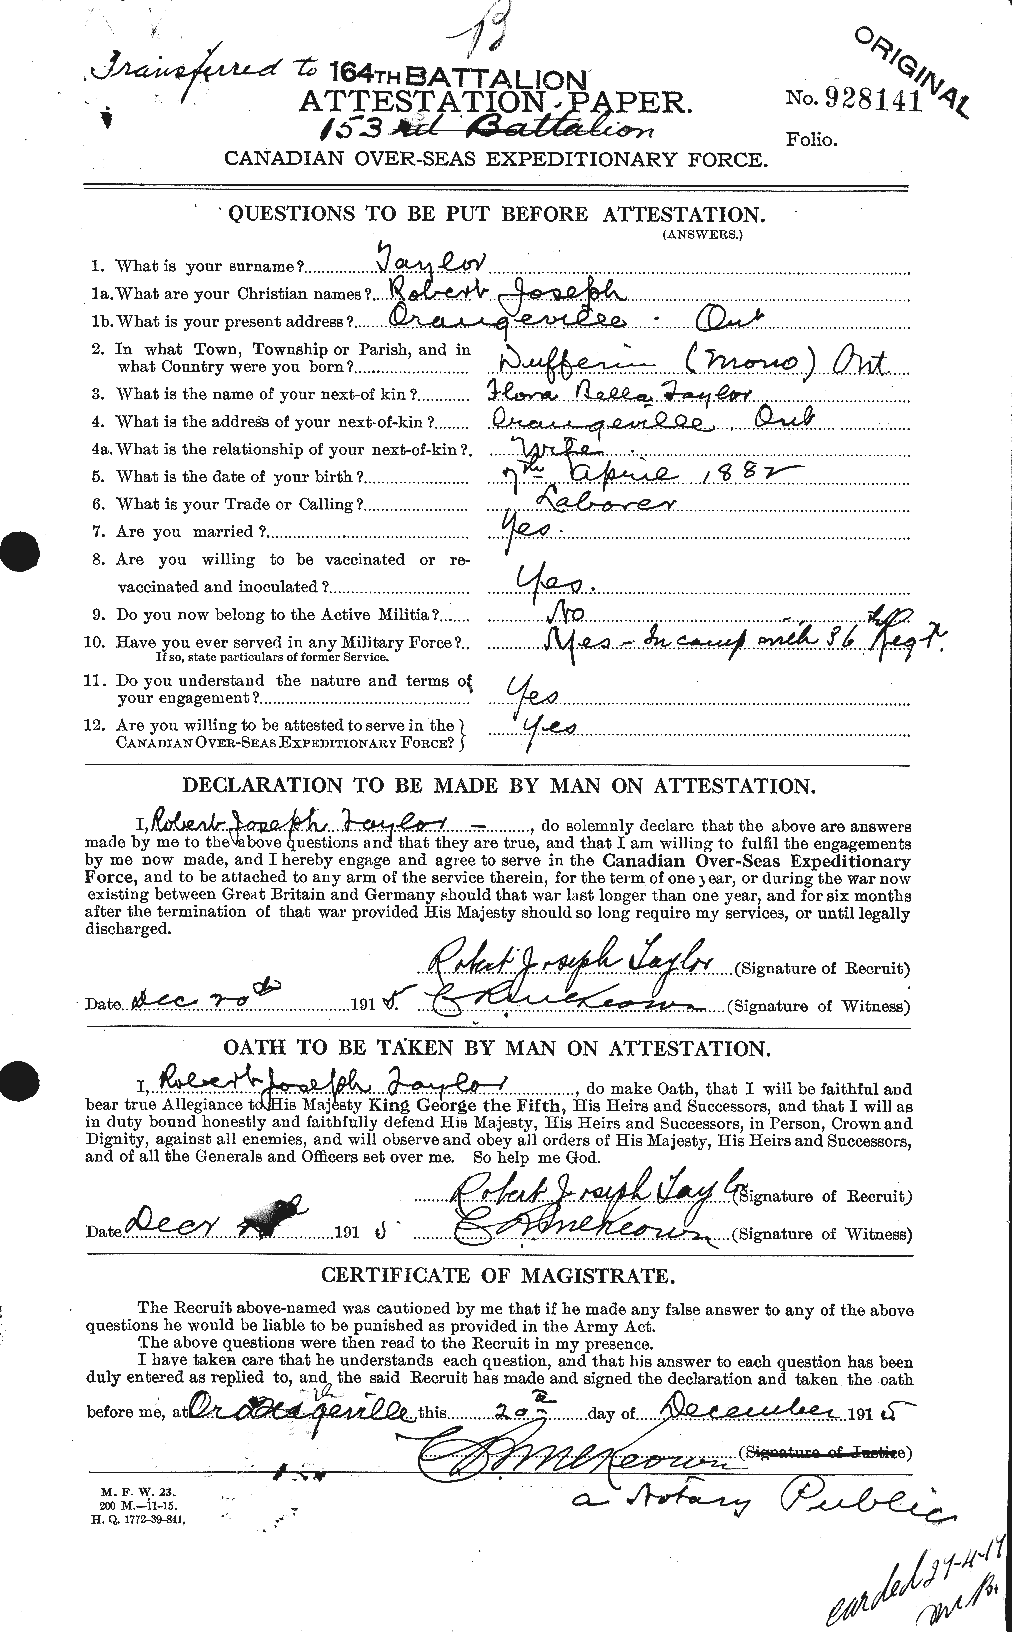 Personnel Records of the First World War - CEF 627490a